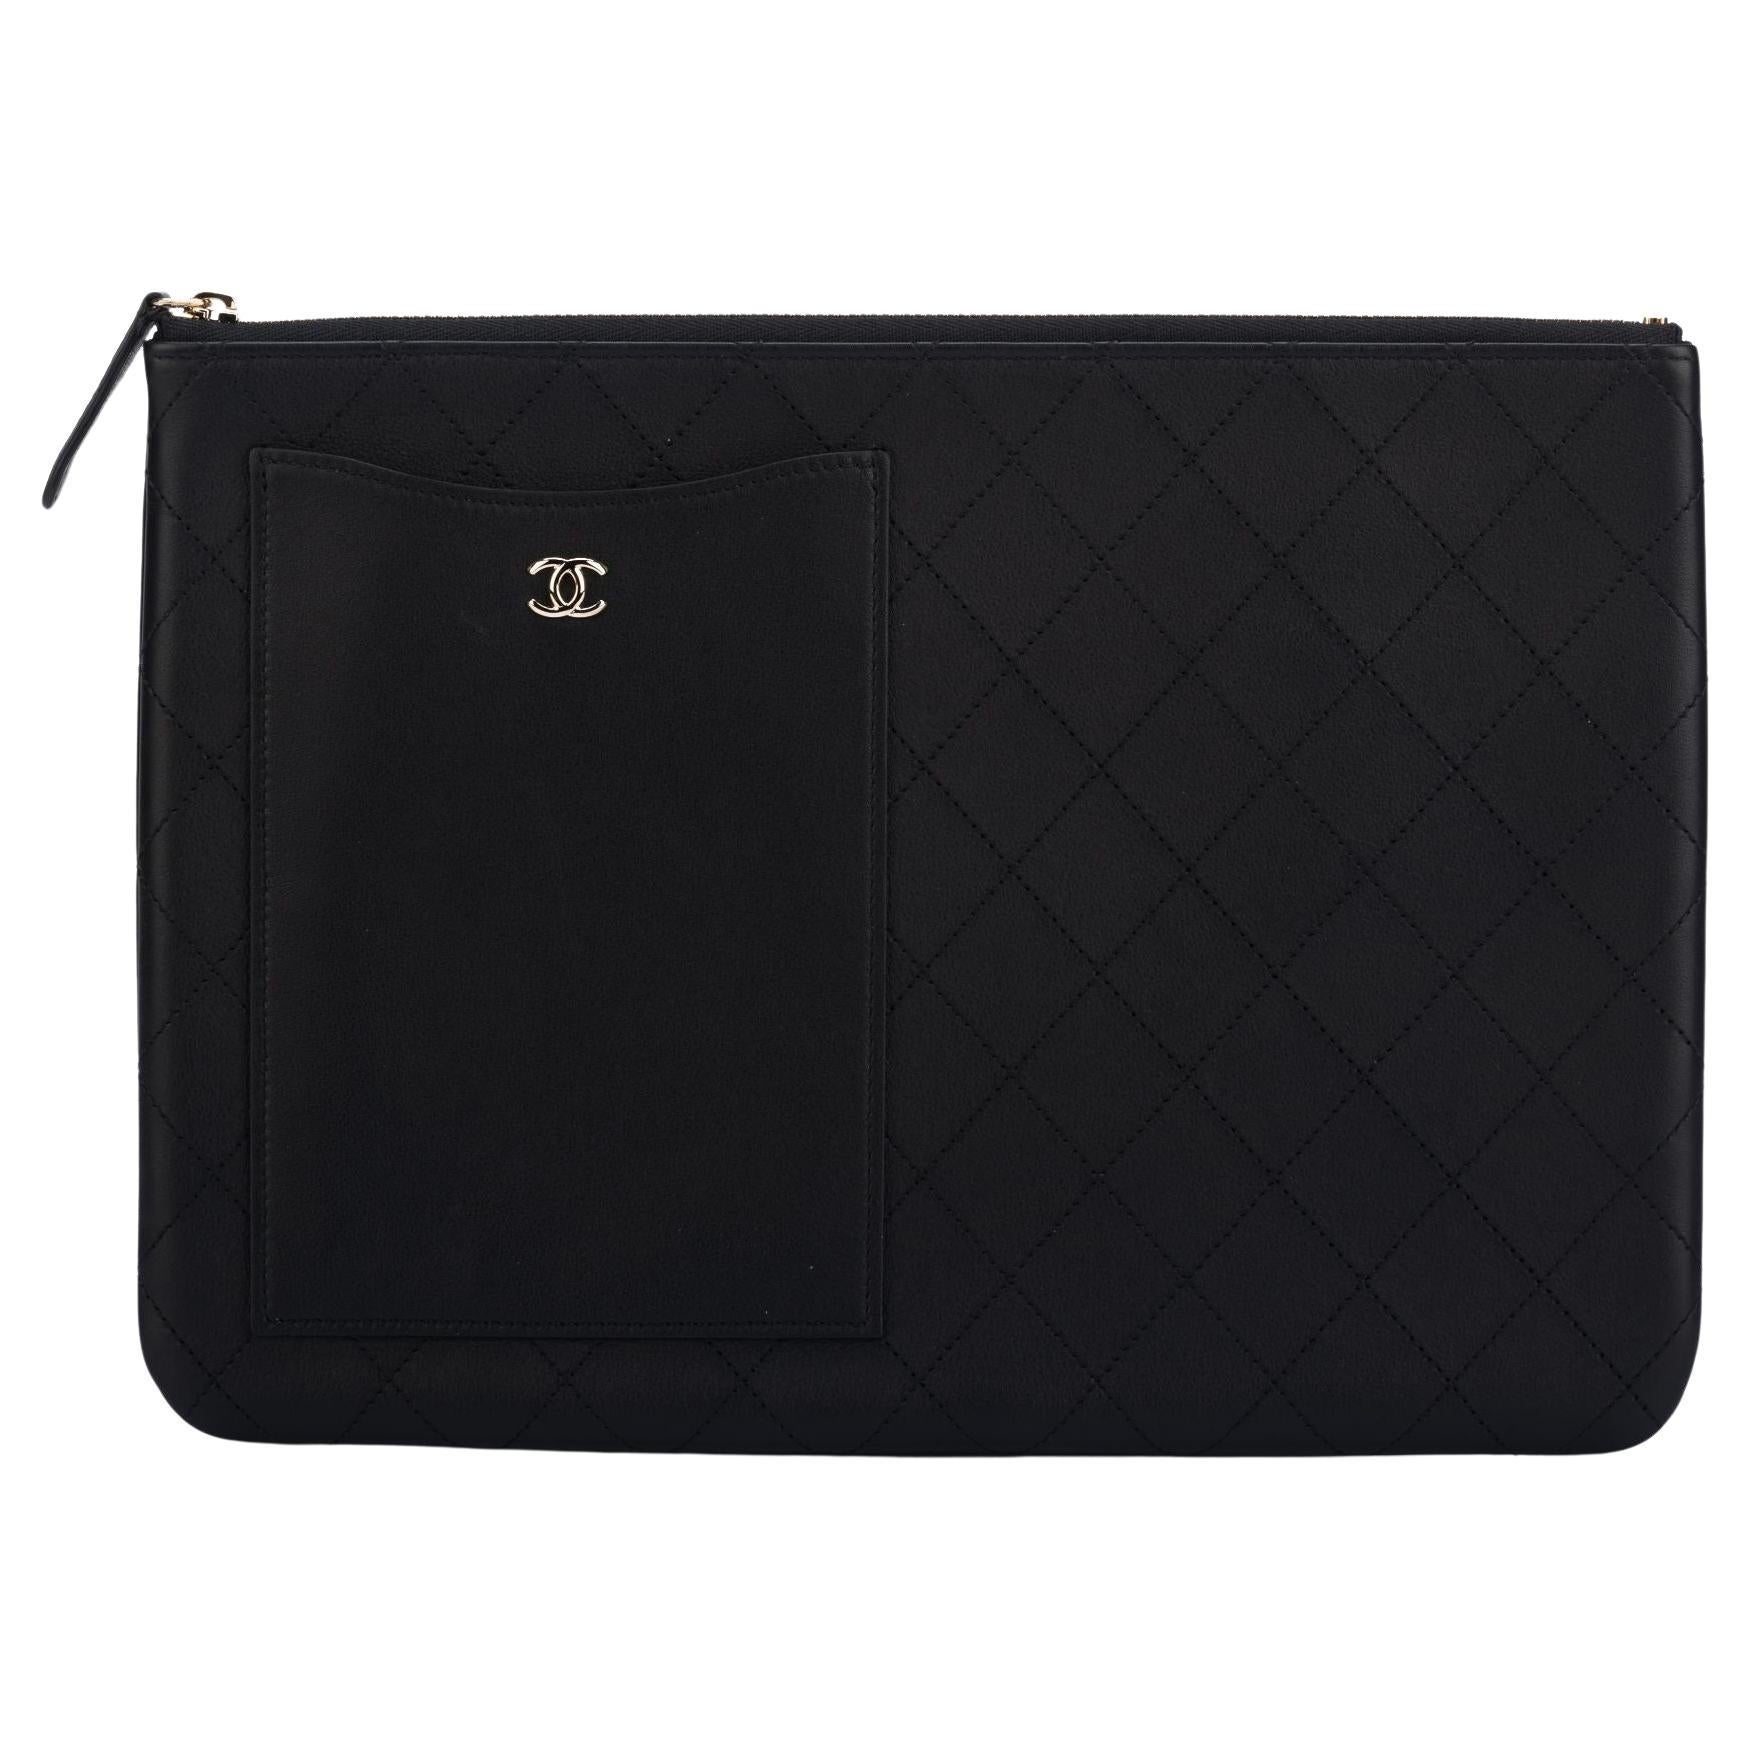 Chanel BNIB Black Quilted Clutch For Sale